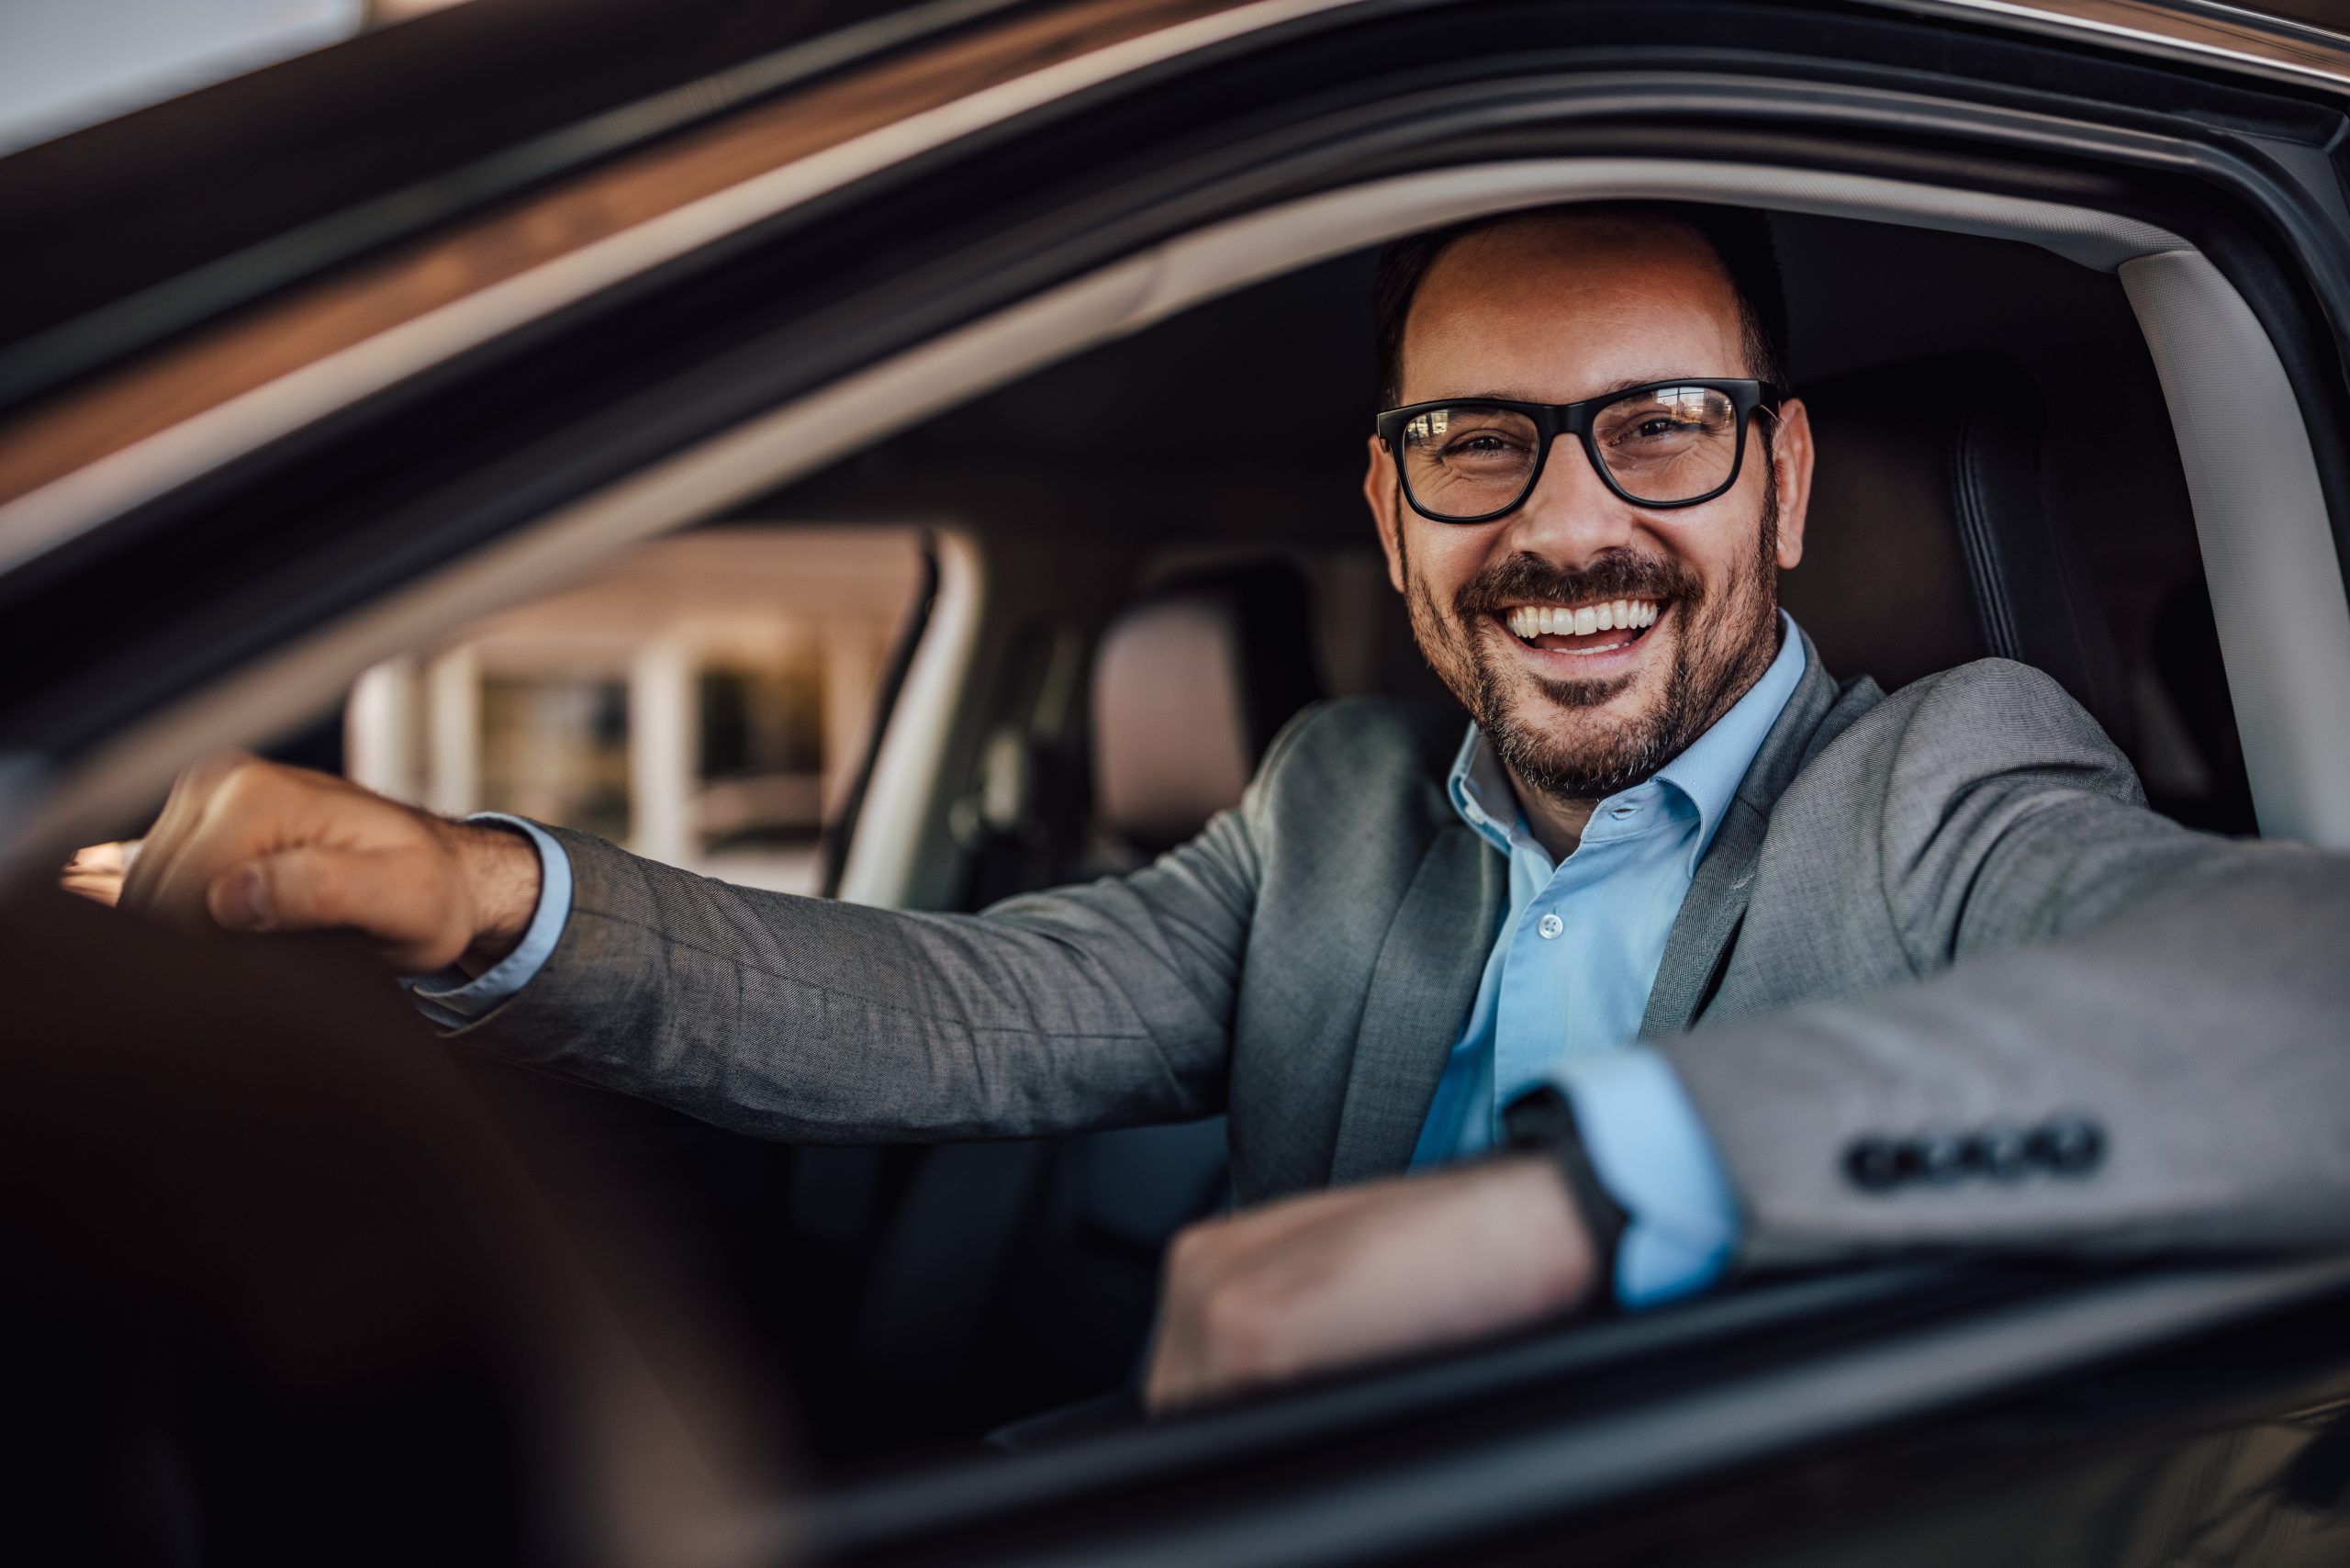 Man with glasses on, dressed in a suit, posing while sitting in his new car.